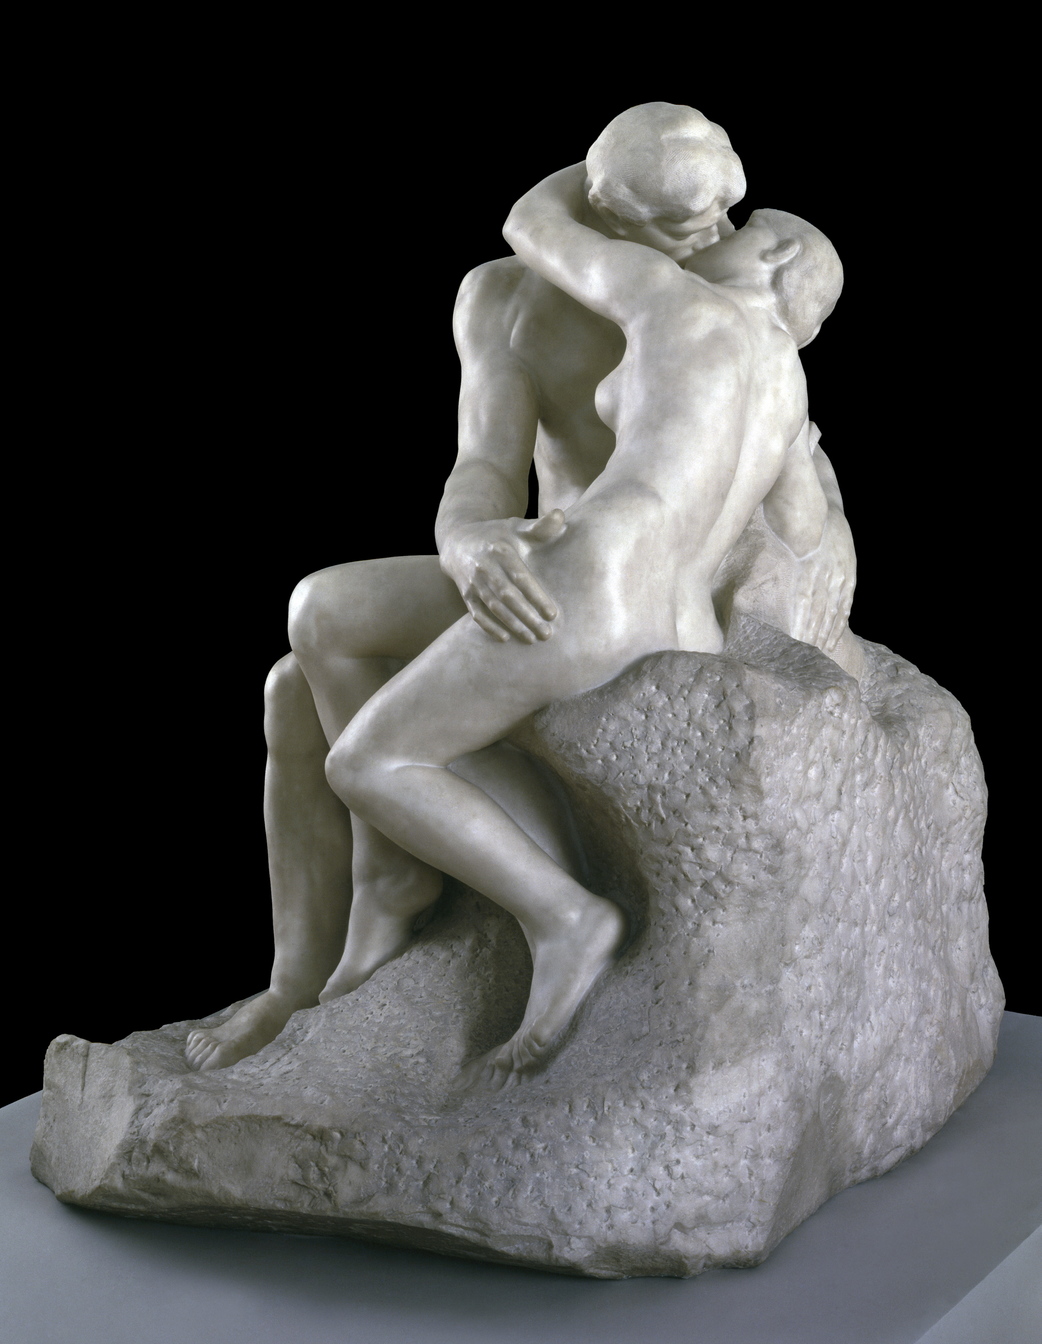 Auguste Rodin 'The kiss' 1901-04 - from the exhibition 'Nude: Art From the Tate Collection'. © Tate, London 2016 